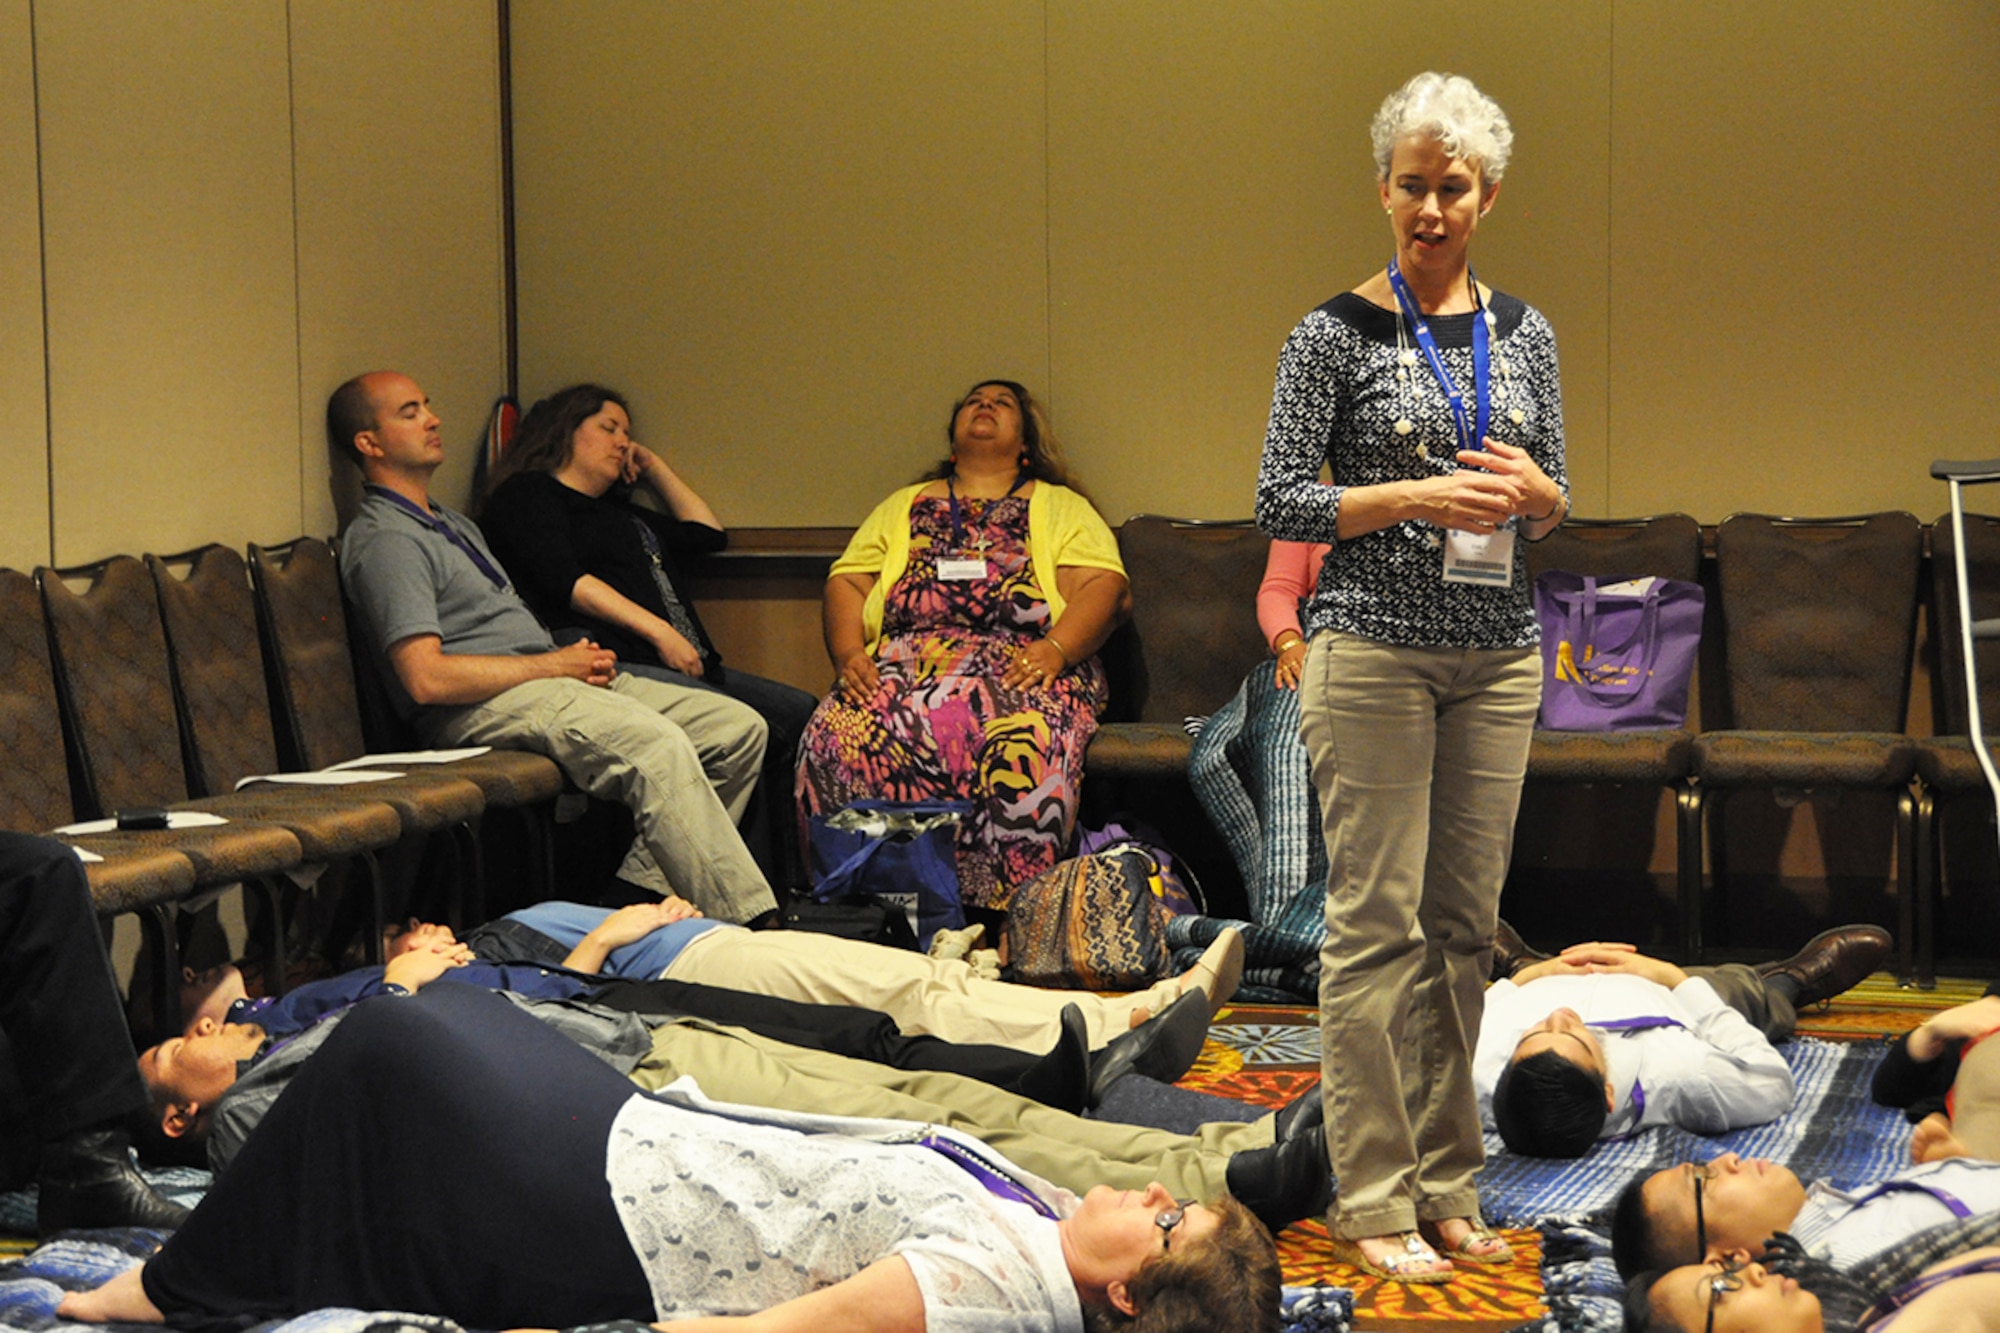 Emily Hain, Integrative Restoration and yoga instructor, monitors Air Force Reserve members and their families June 27, 2015, during a breakout session at an Air Force Reserve Yellow Ribbon Program training event in Orlando, Florida. Yellow Ribbon promotes the well-being of reservists and their families by connecting them with resources before and after deployments. (U.S Air Force photo/Master Sgt. James Branch)